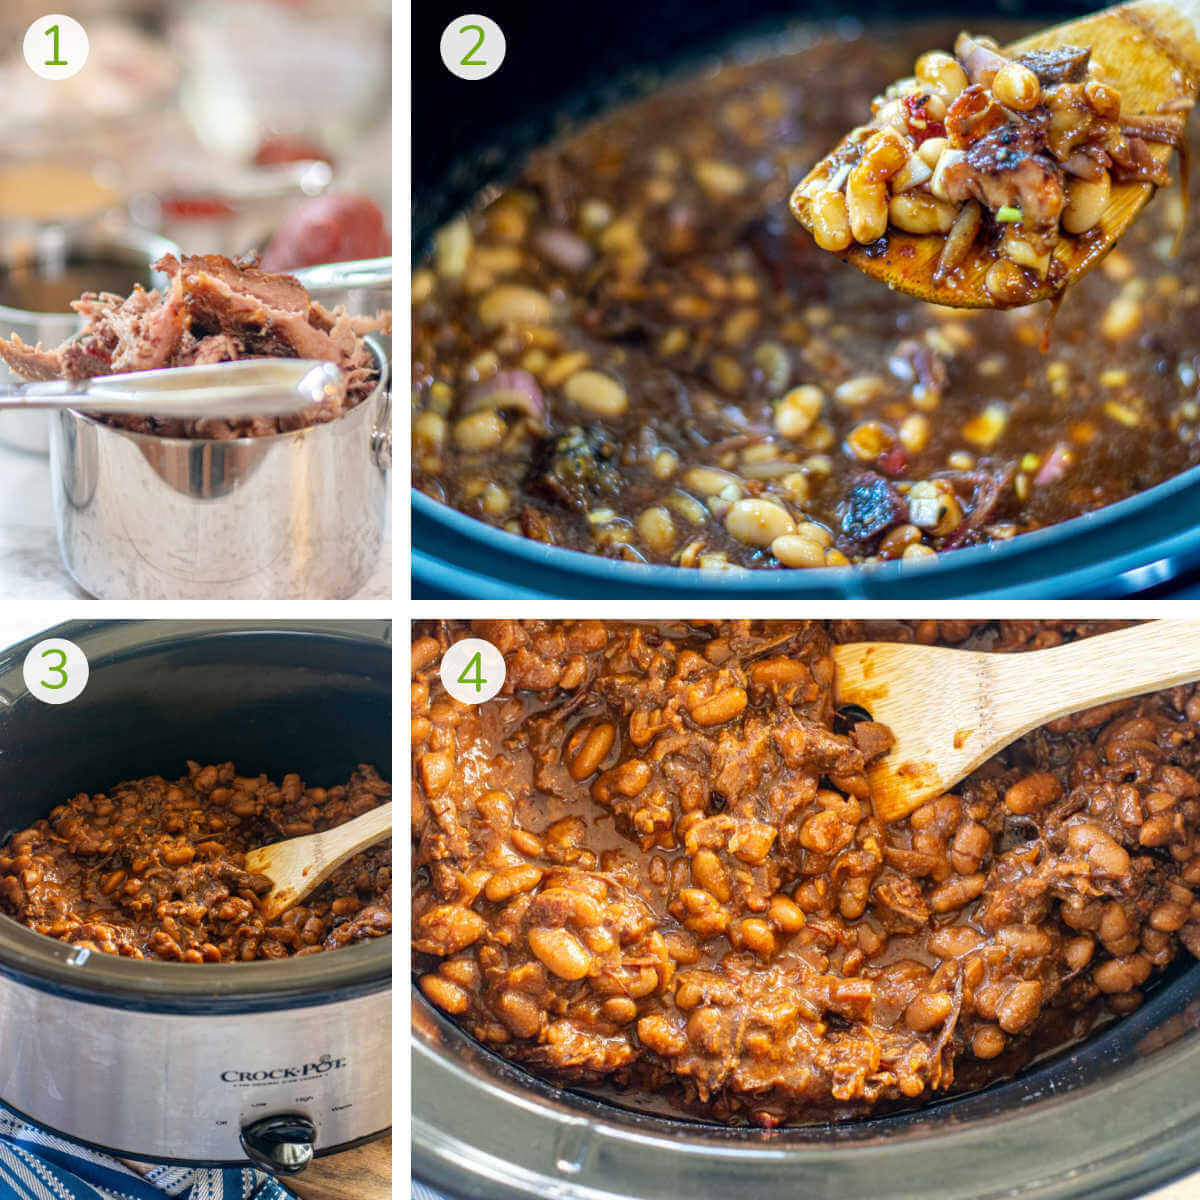 several process photos showing how to shred the brisket, add the ingredients to the slow cooker and then let it cook on low tmeperature.